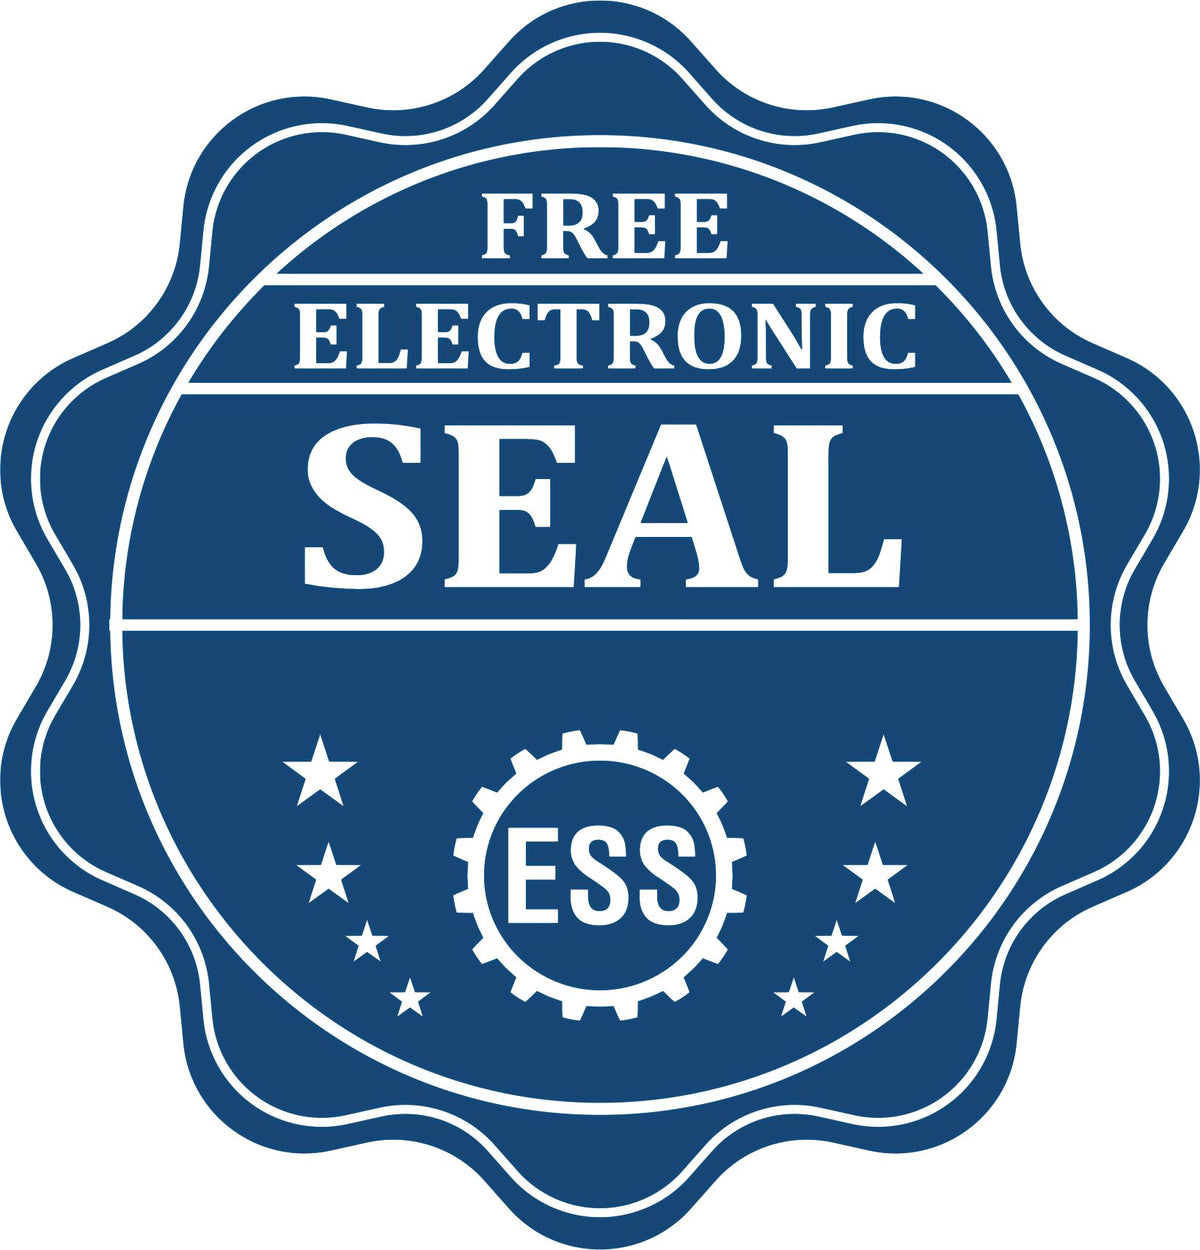 A badge showing a free electronic seal for the Long Reach Connecticut Land Surveyor Seal with stars and the ESS gear on the emblem.